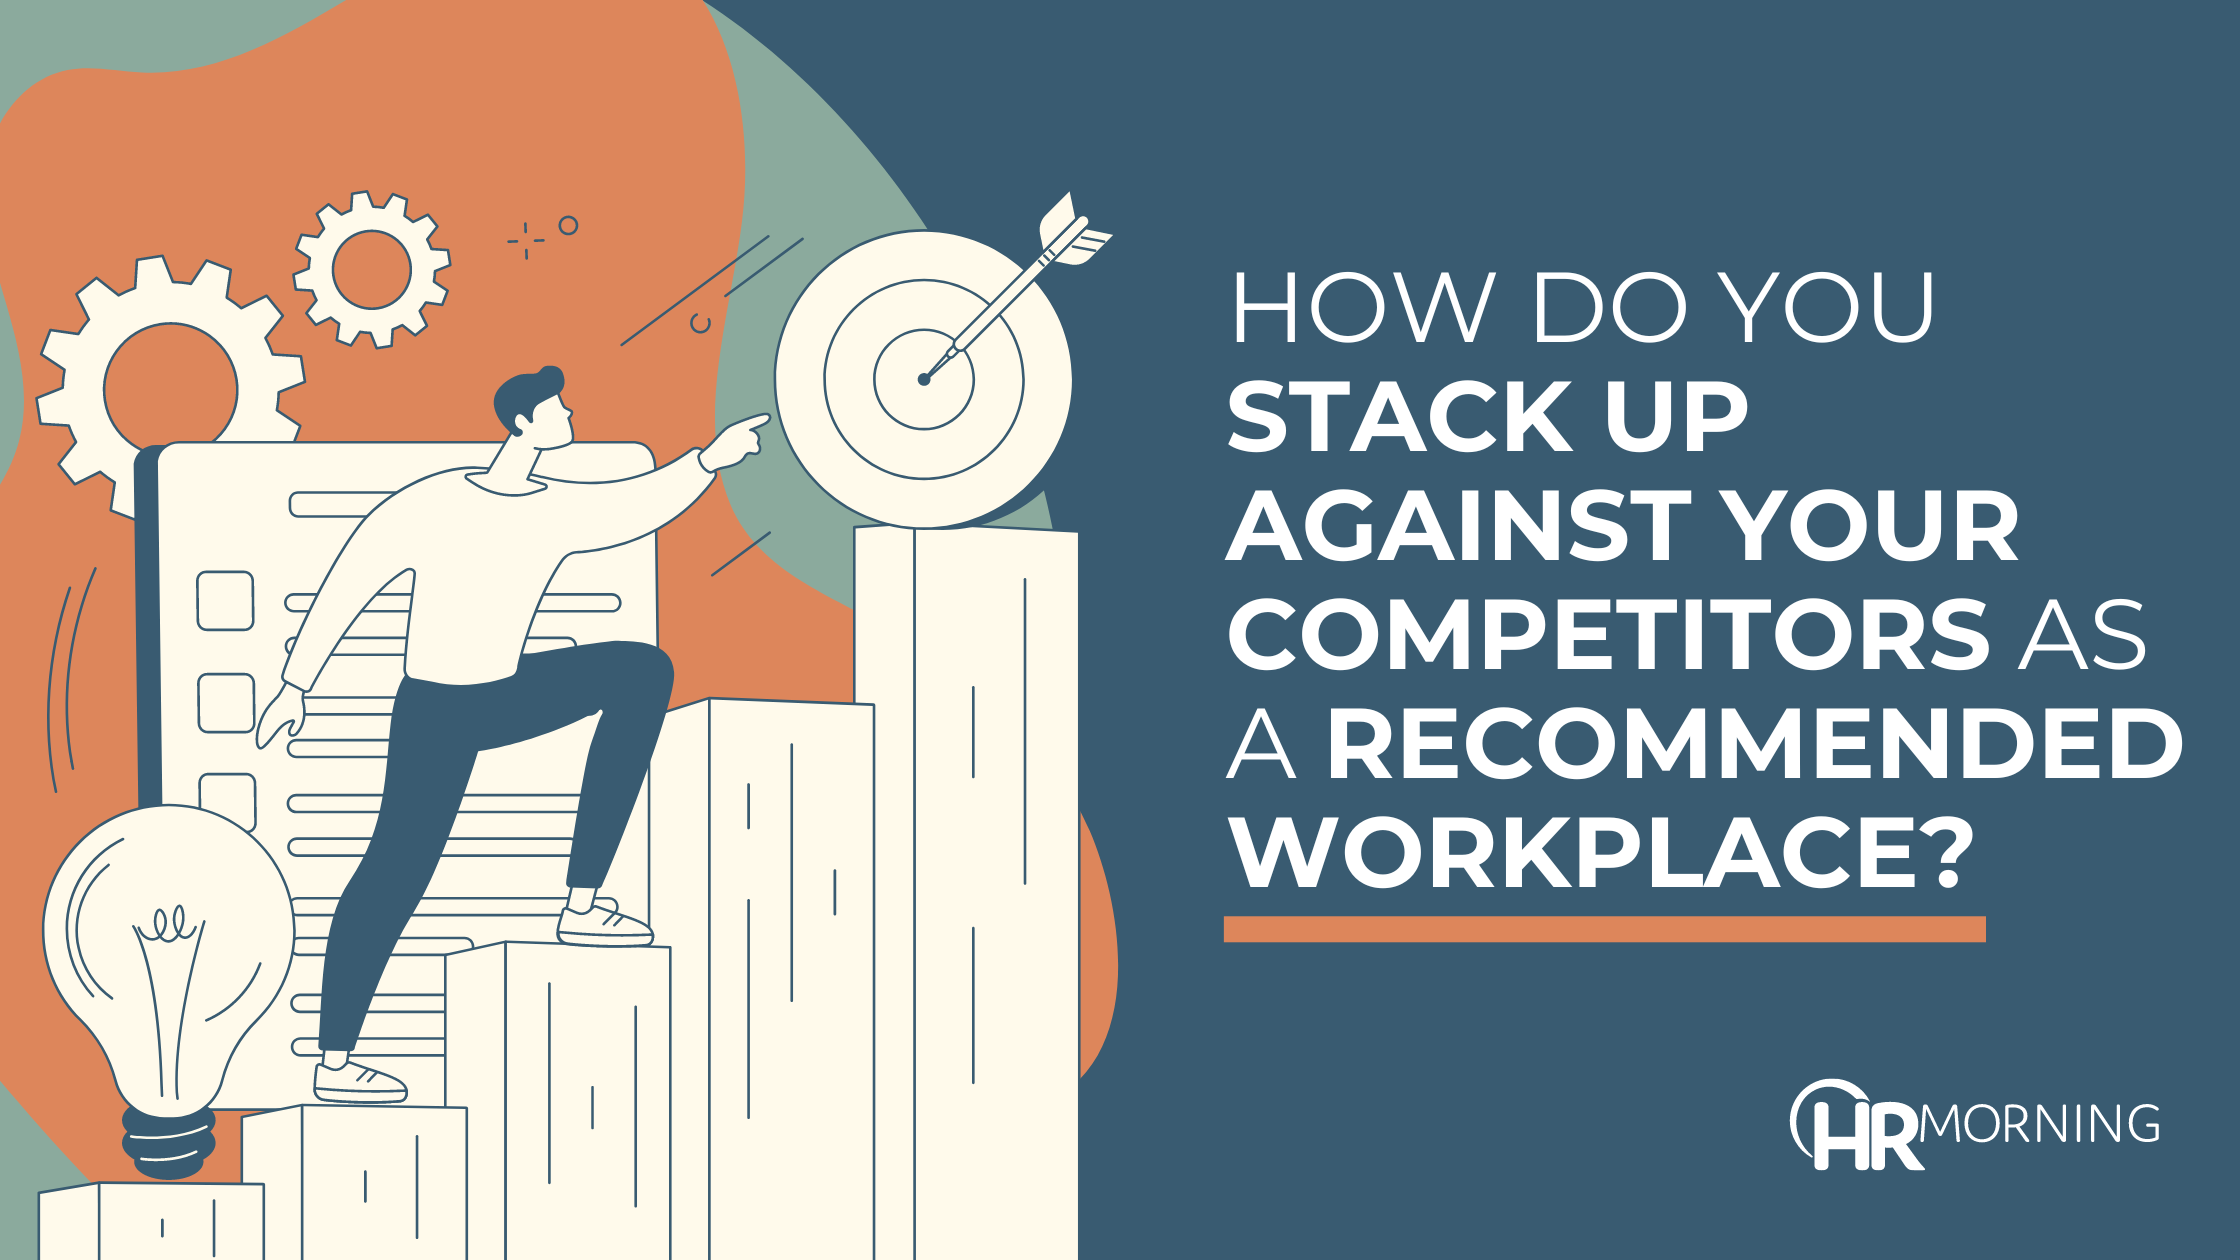 How do you stack up against your competitors as a recommended workplace?